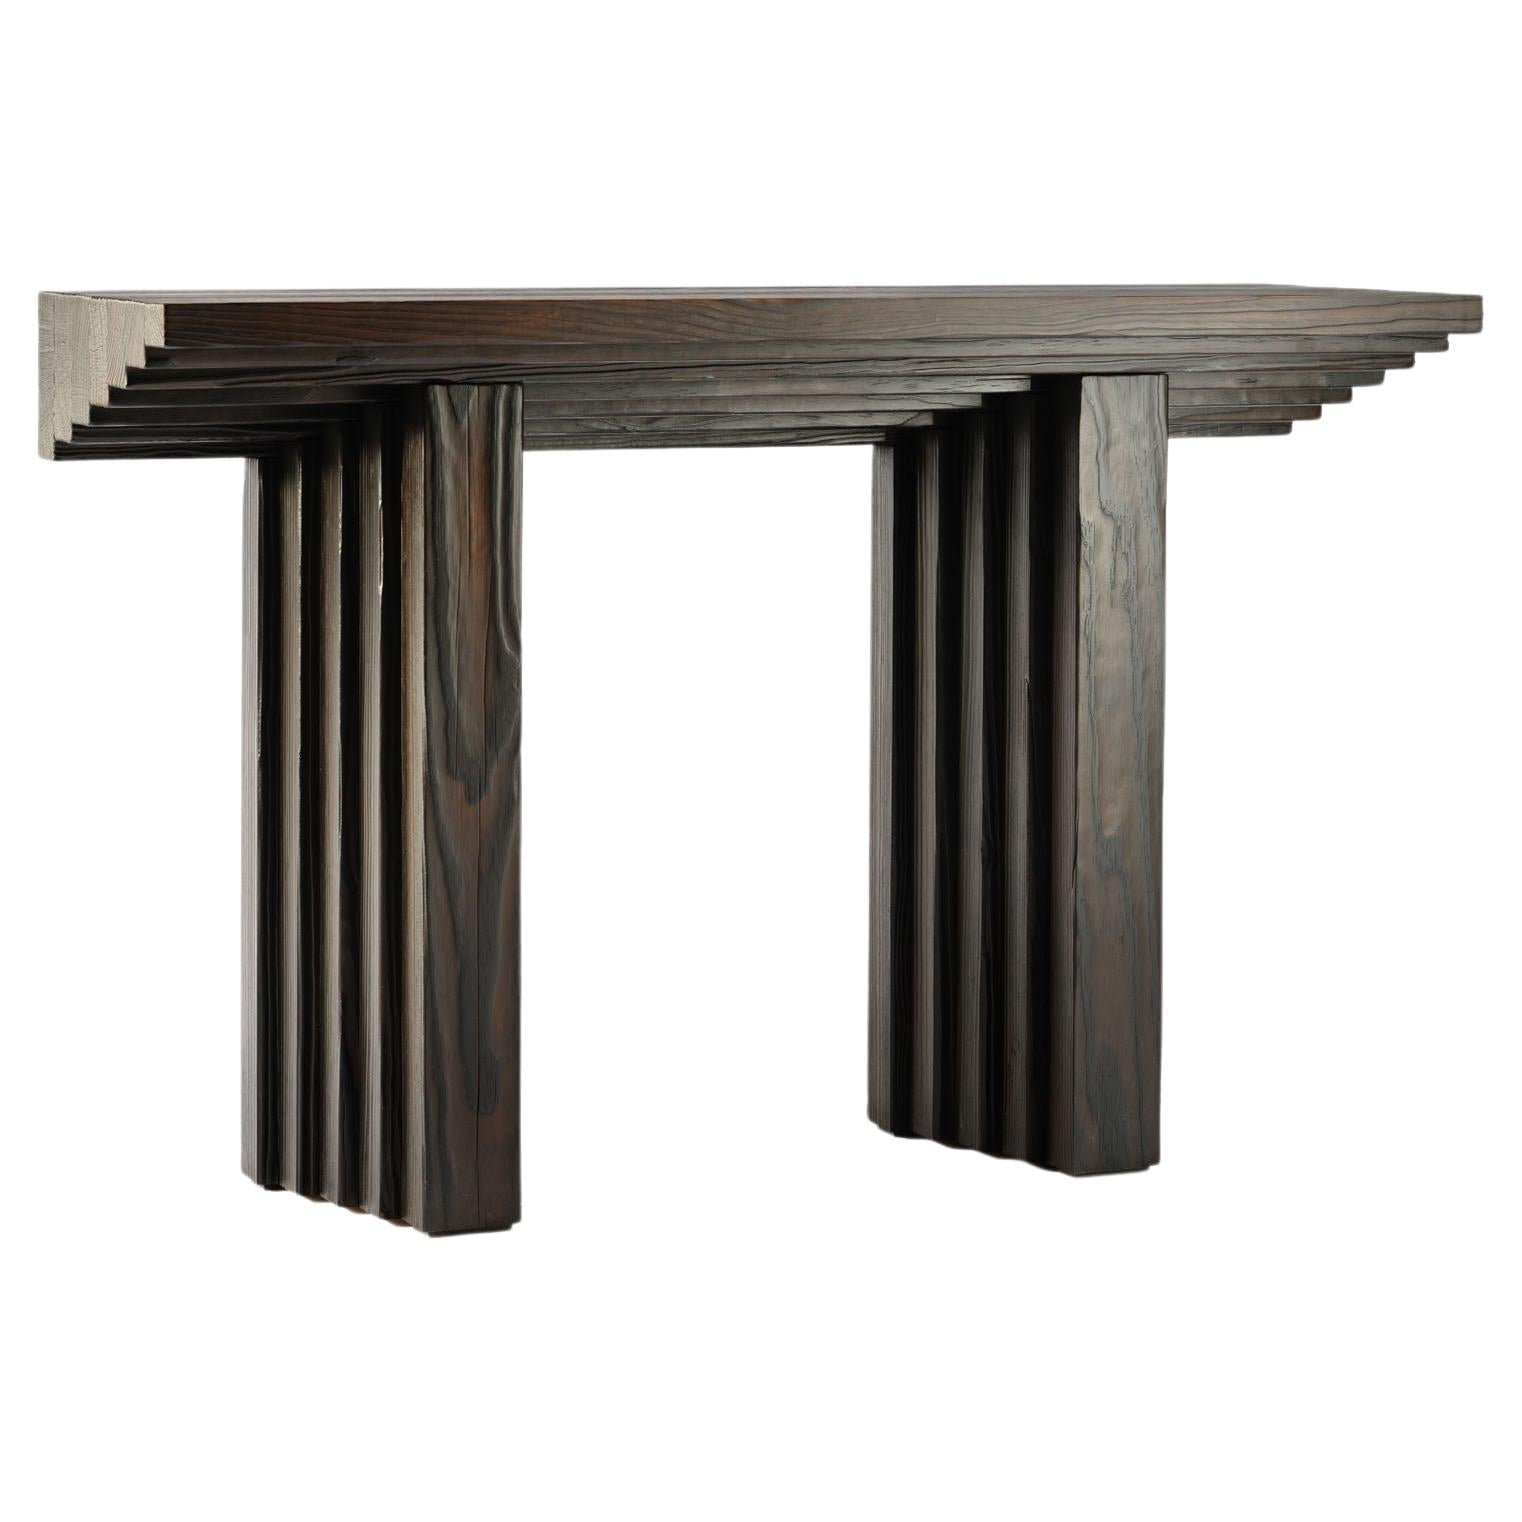 Contemporary black ‘Shou Sugi Ban’ burned solid wood Ater console by Tim Vranken